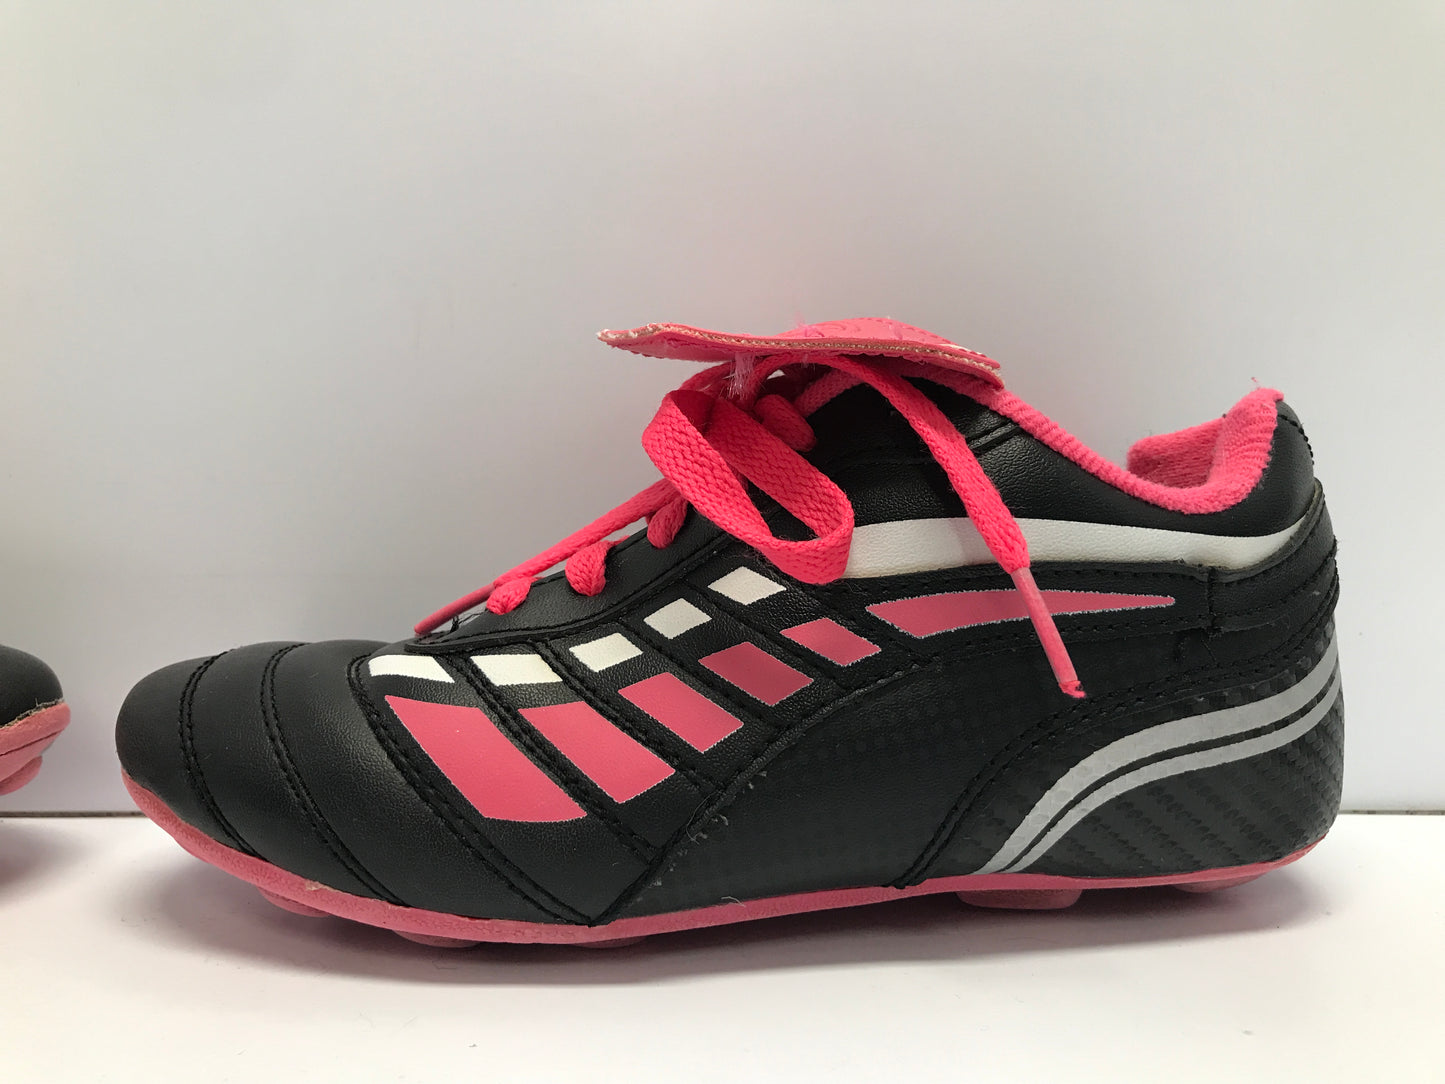 Soccer Shoes Cleats Child Size 1 Athlete Pink Black